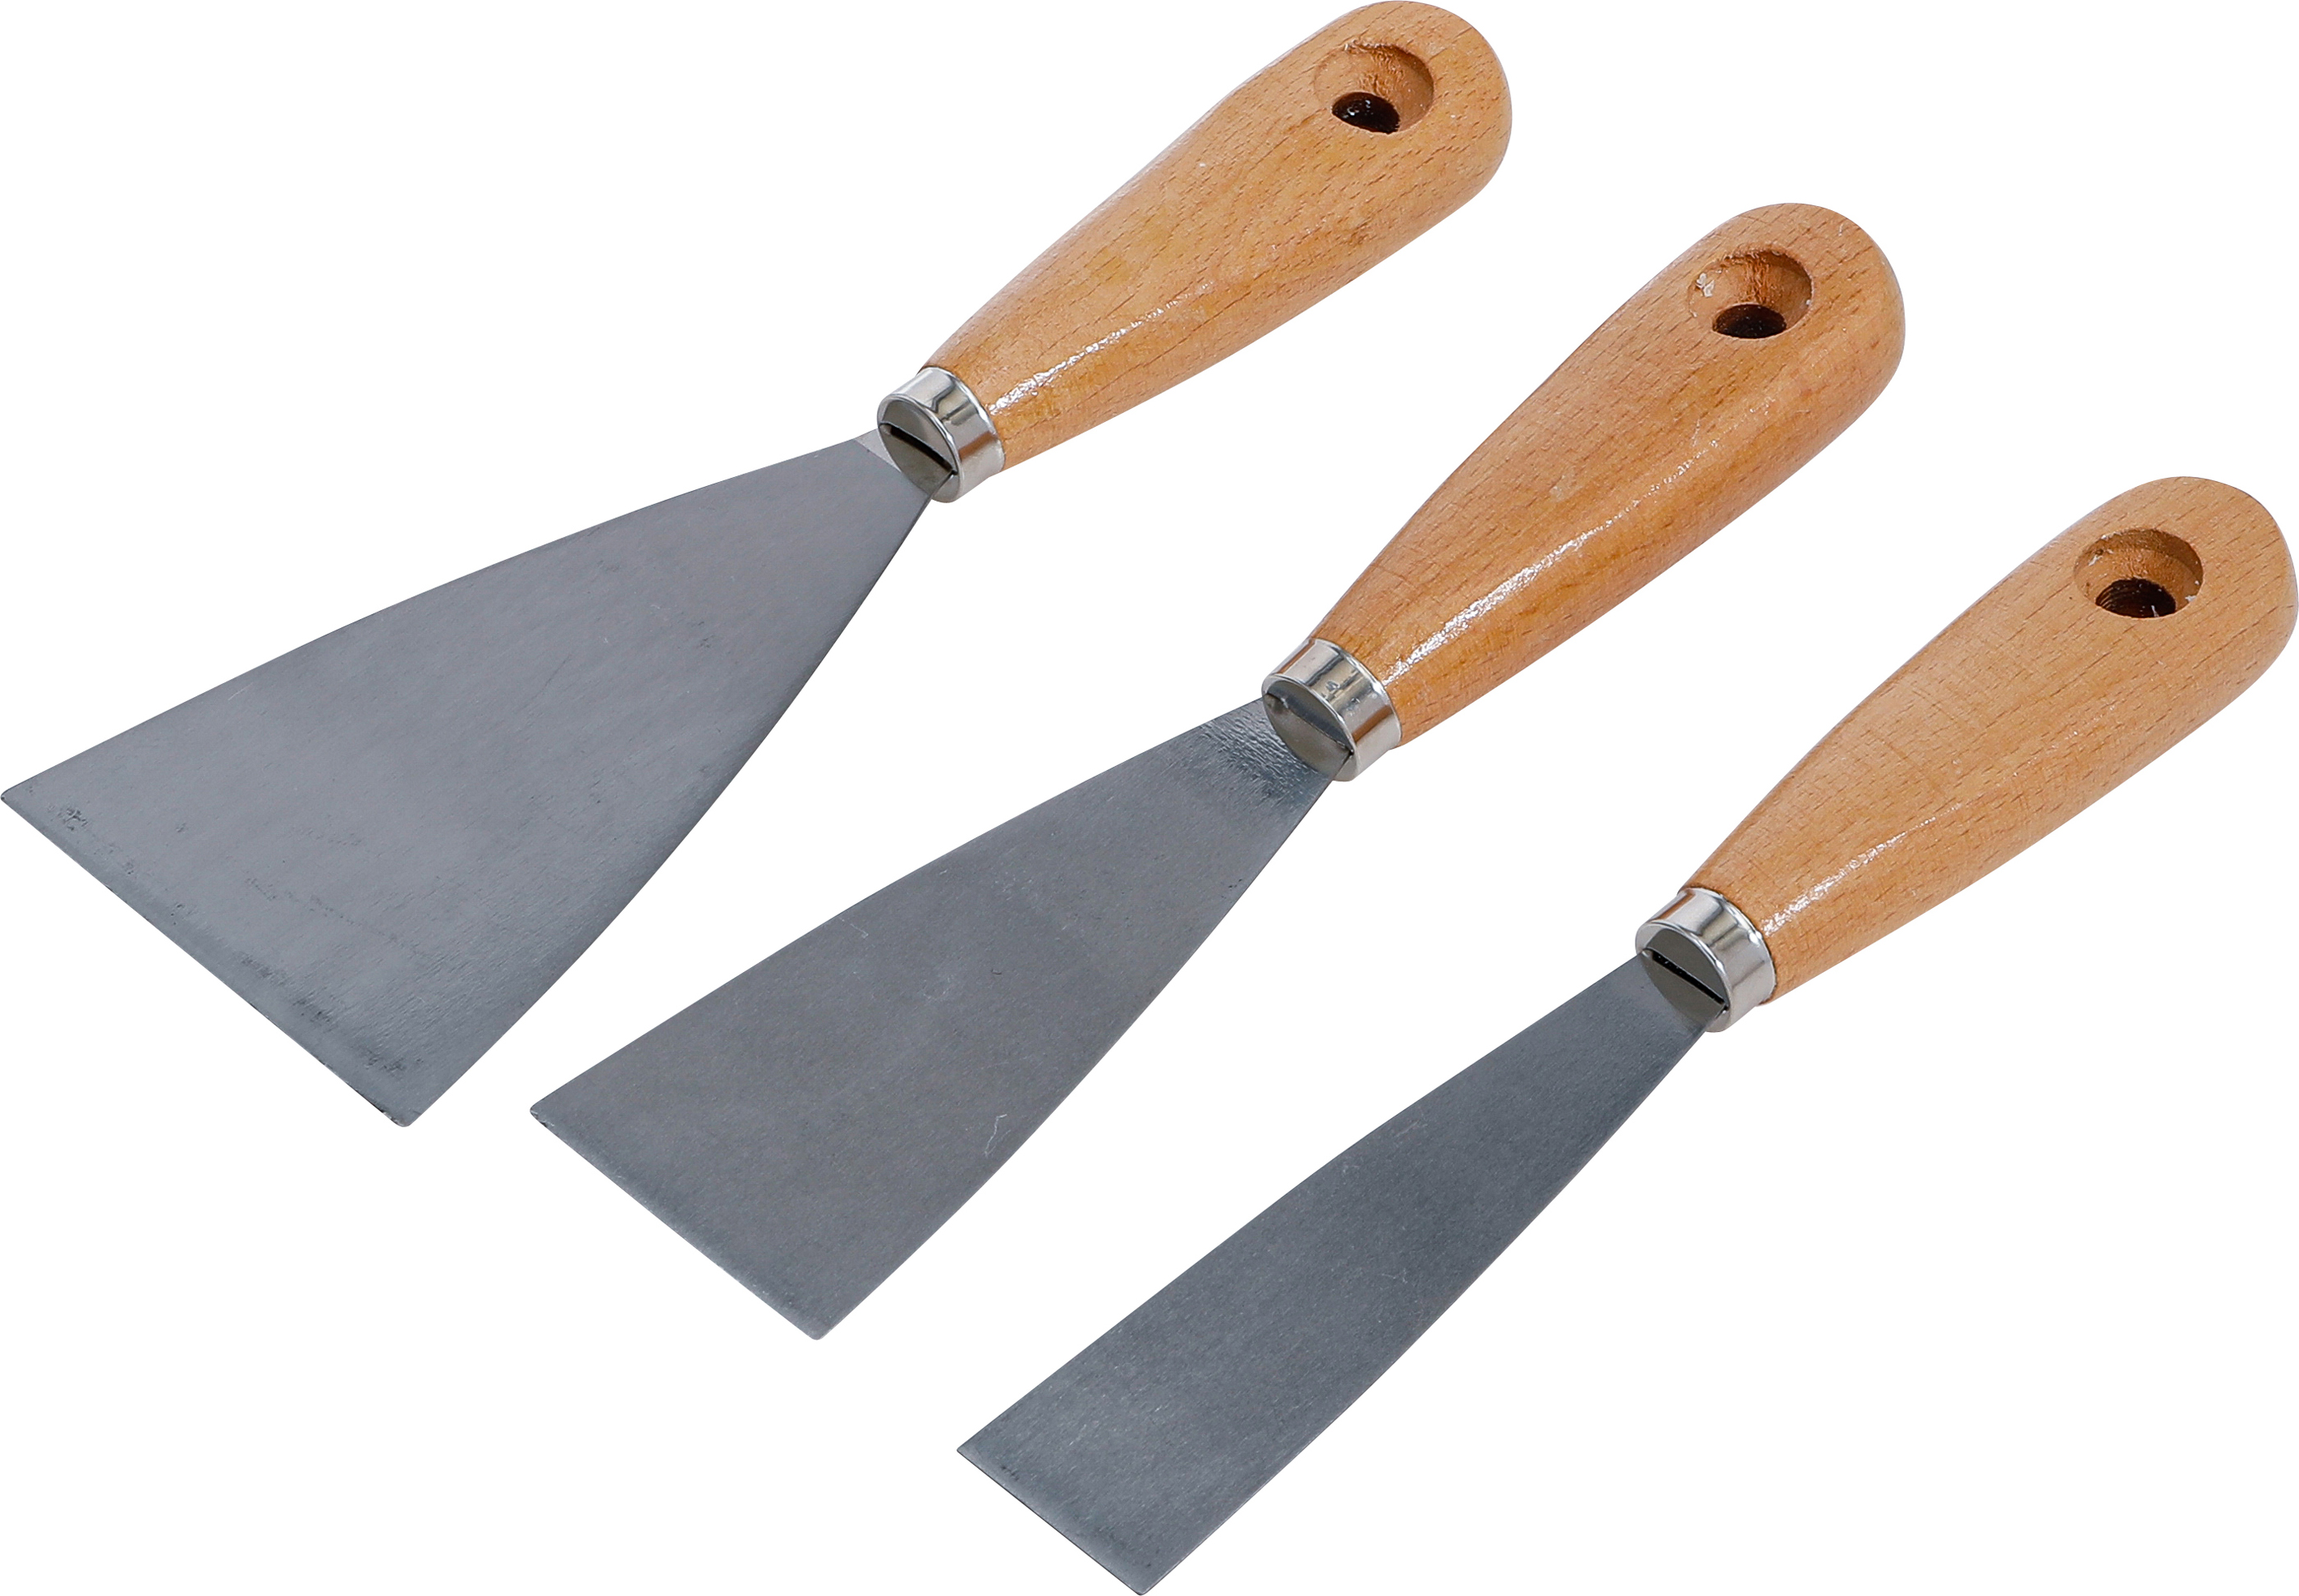 Putty Knife Set, Wooden Handle, 30 / 50 / 80 mm